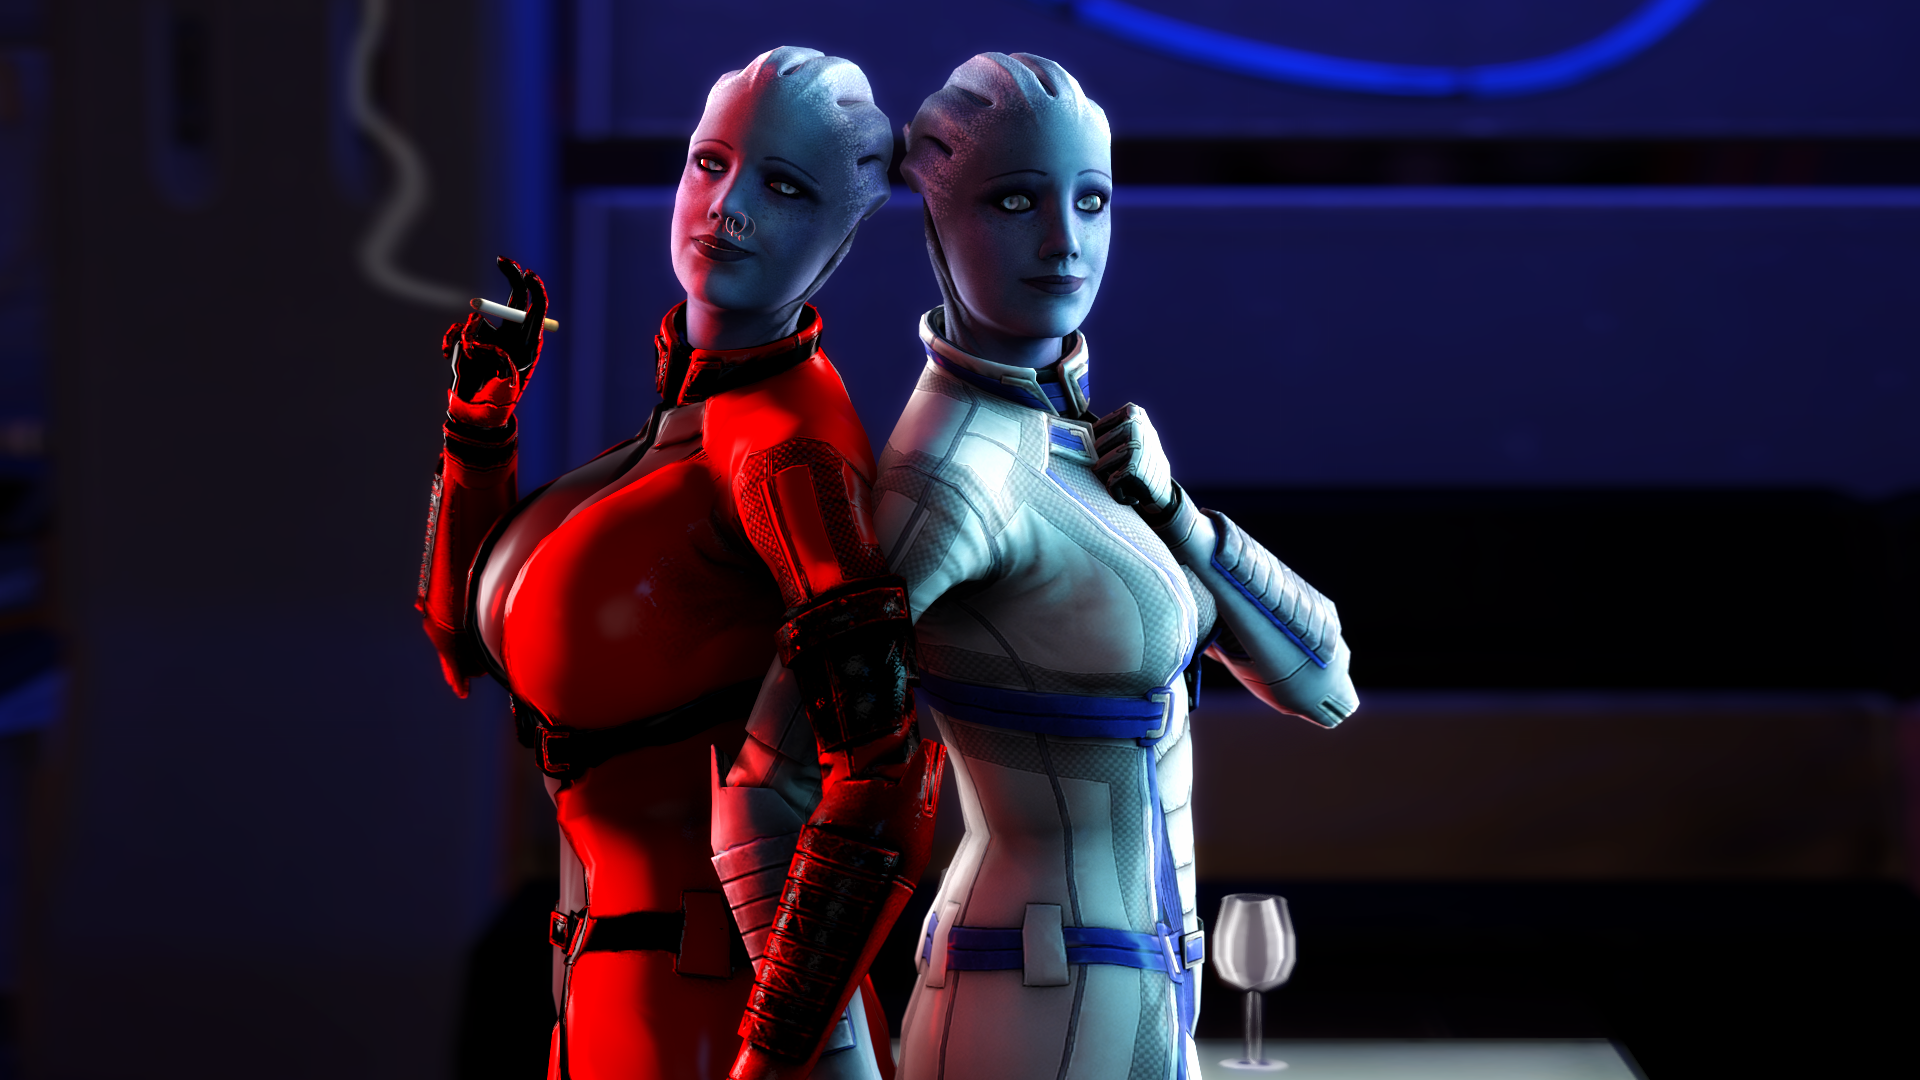 General 1920x1080 Mass Effect smoking video games big boobs cigarettes Liara T'Soni PC gaming boobs huge breasts two women nose ring CGI science fiction science fiction women video game art video game girls